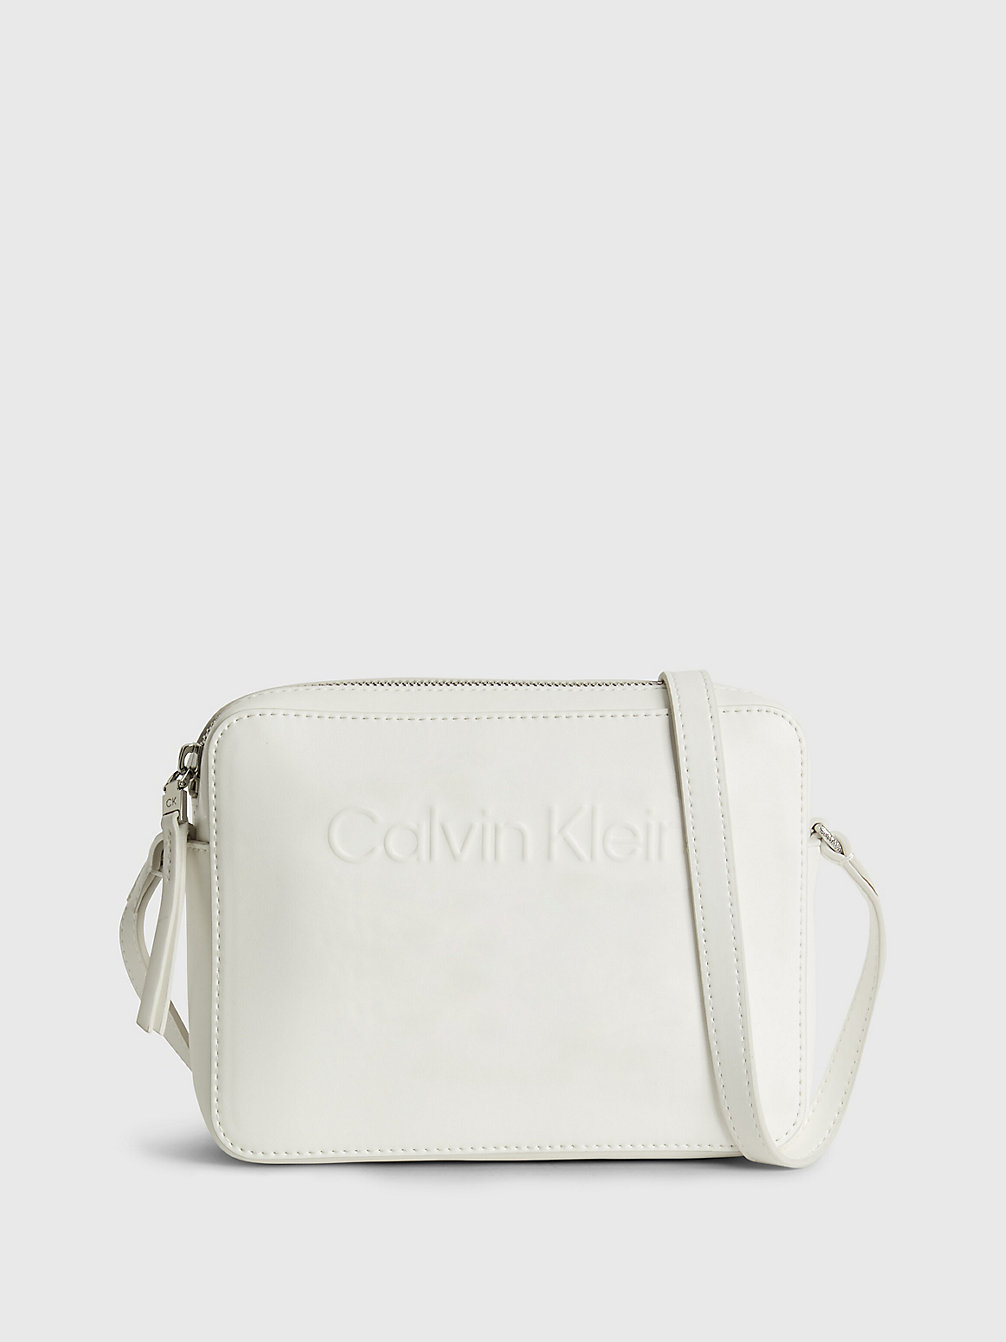 BRIGHT WHITE Recycled Crossbody Bag undefined women Calvin Klein